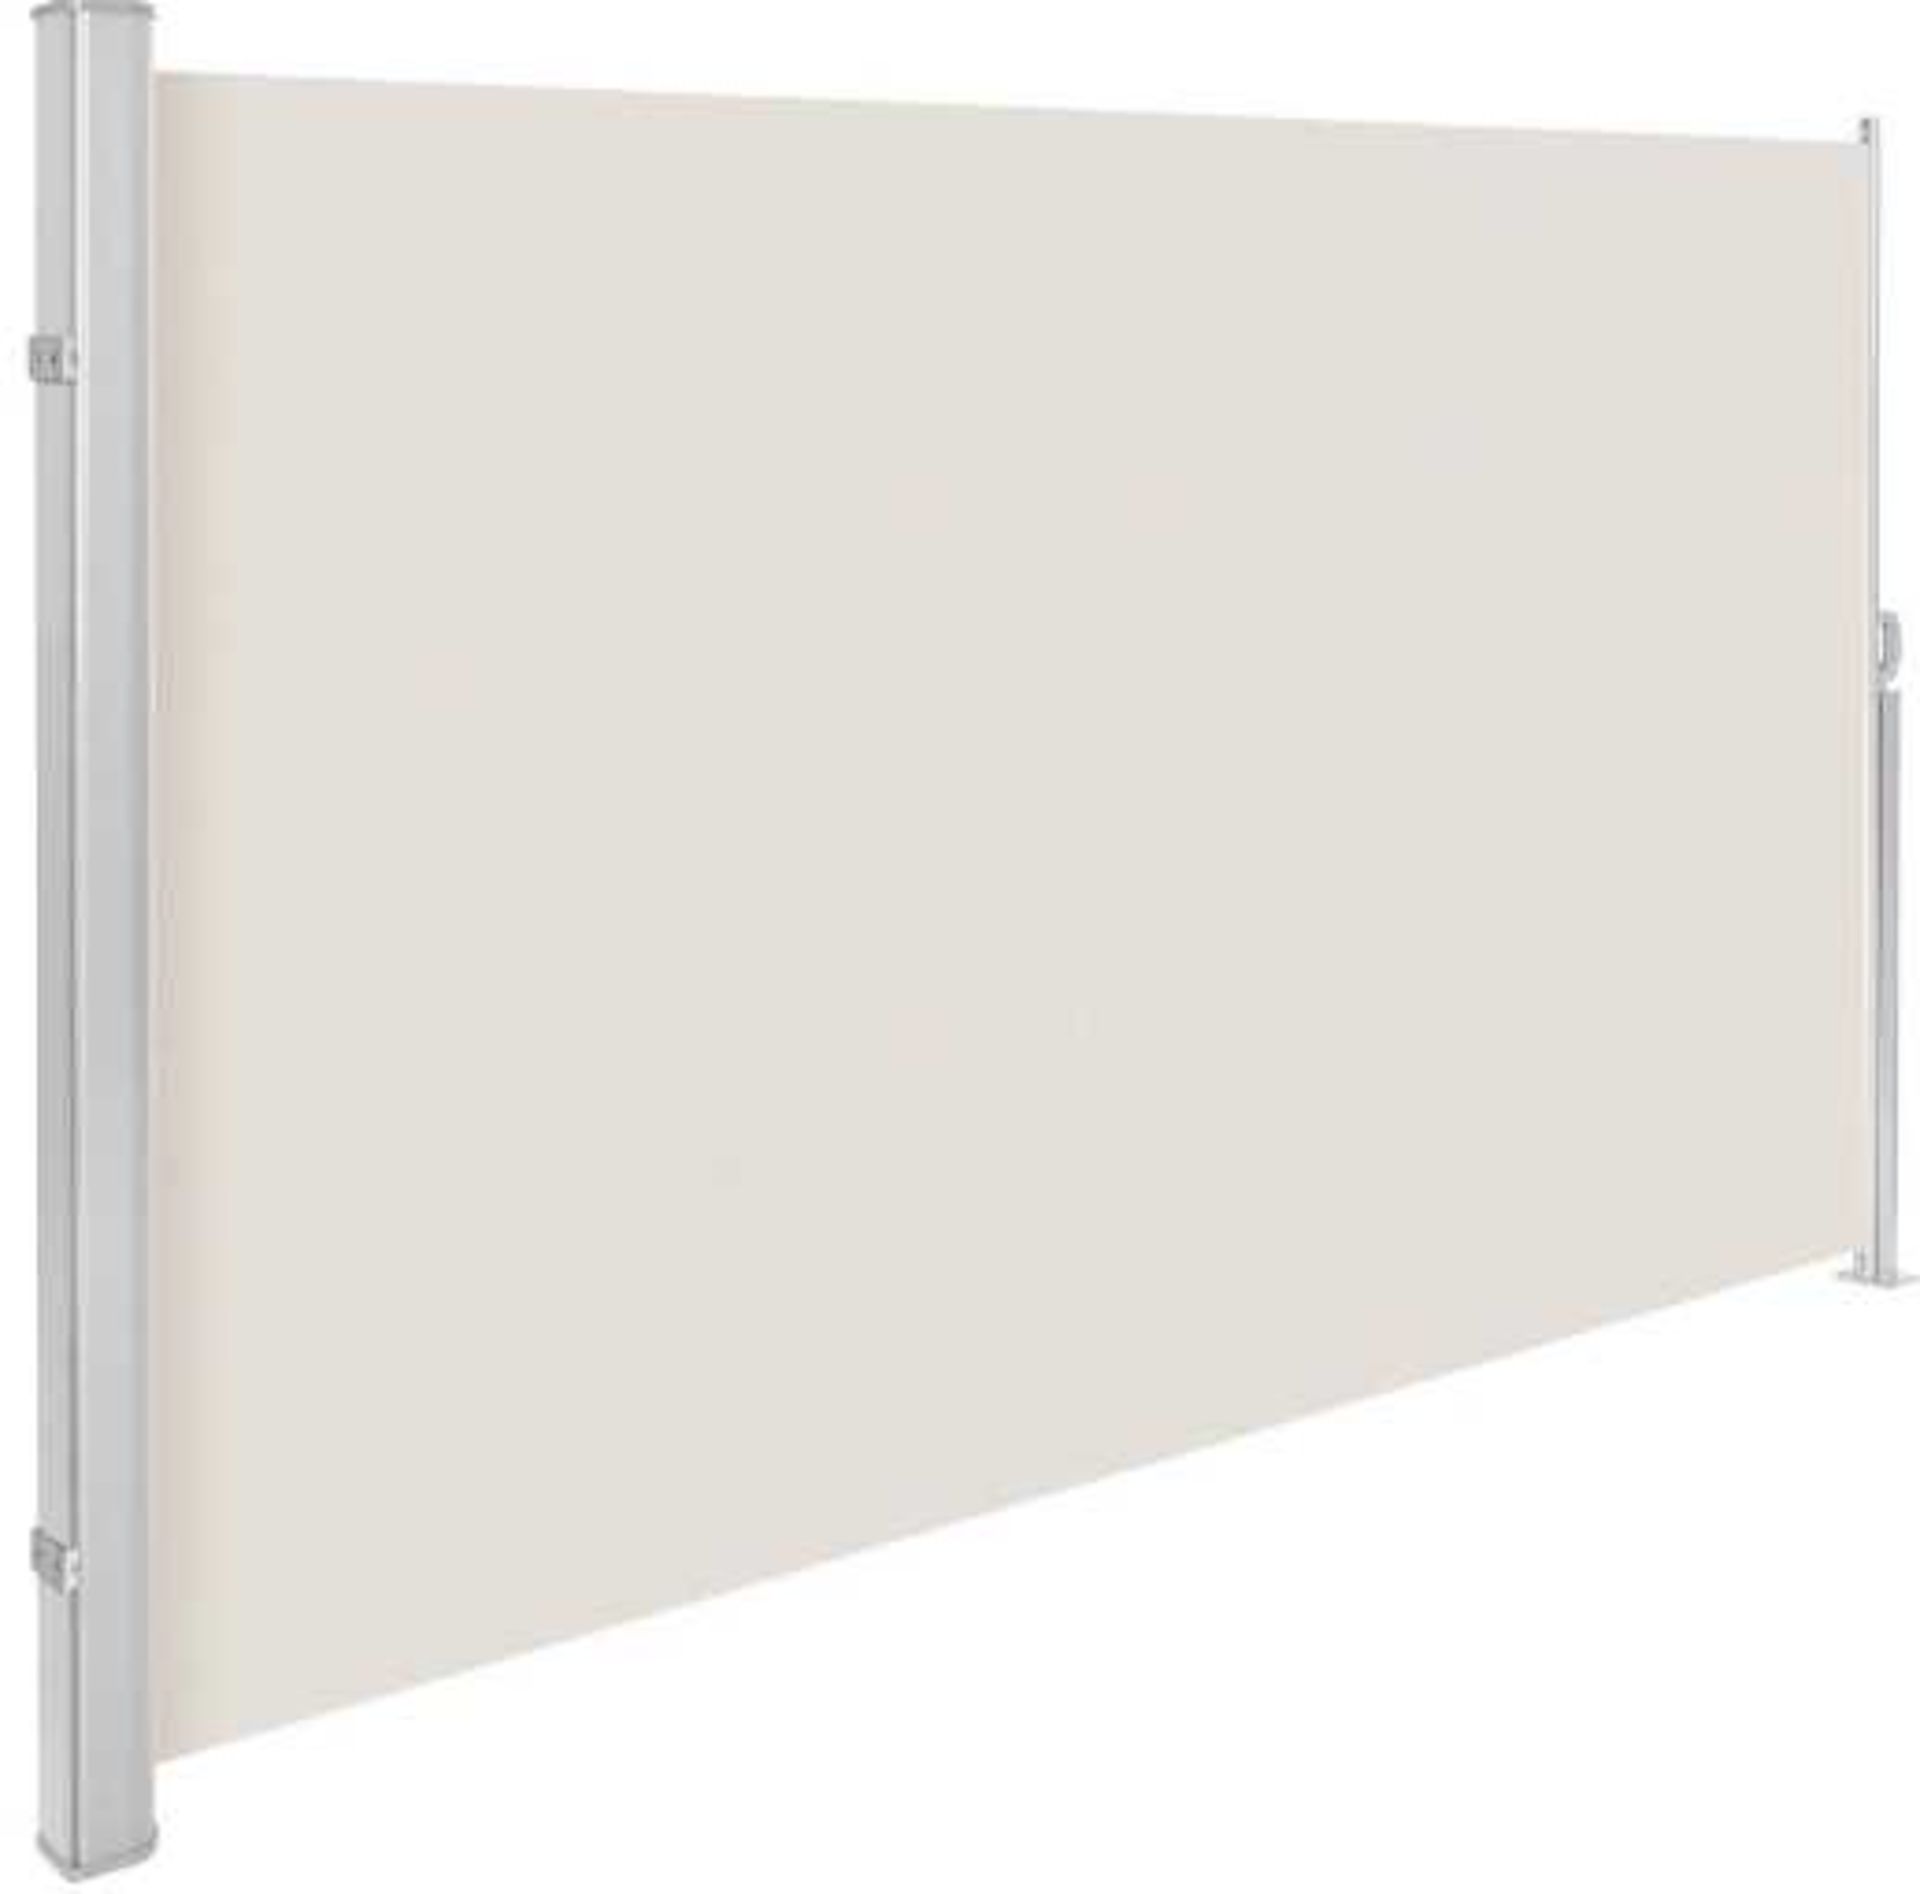 VAT Tectake - Aluminium Side Awning Beige 180 x 300 cm - Unchecked & Boxed. RRP œ89.99